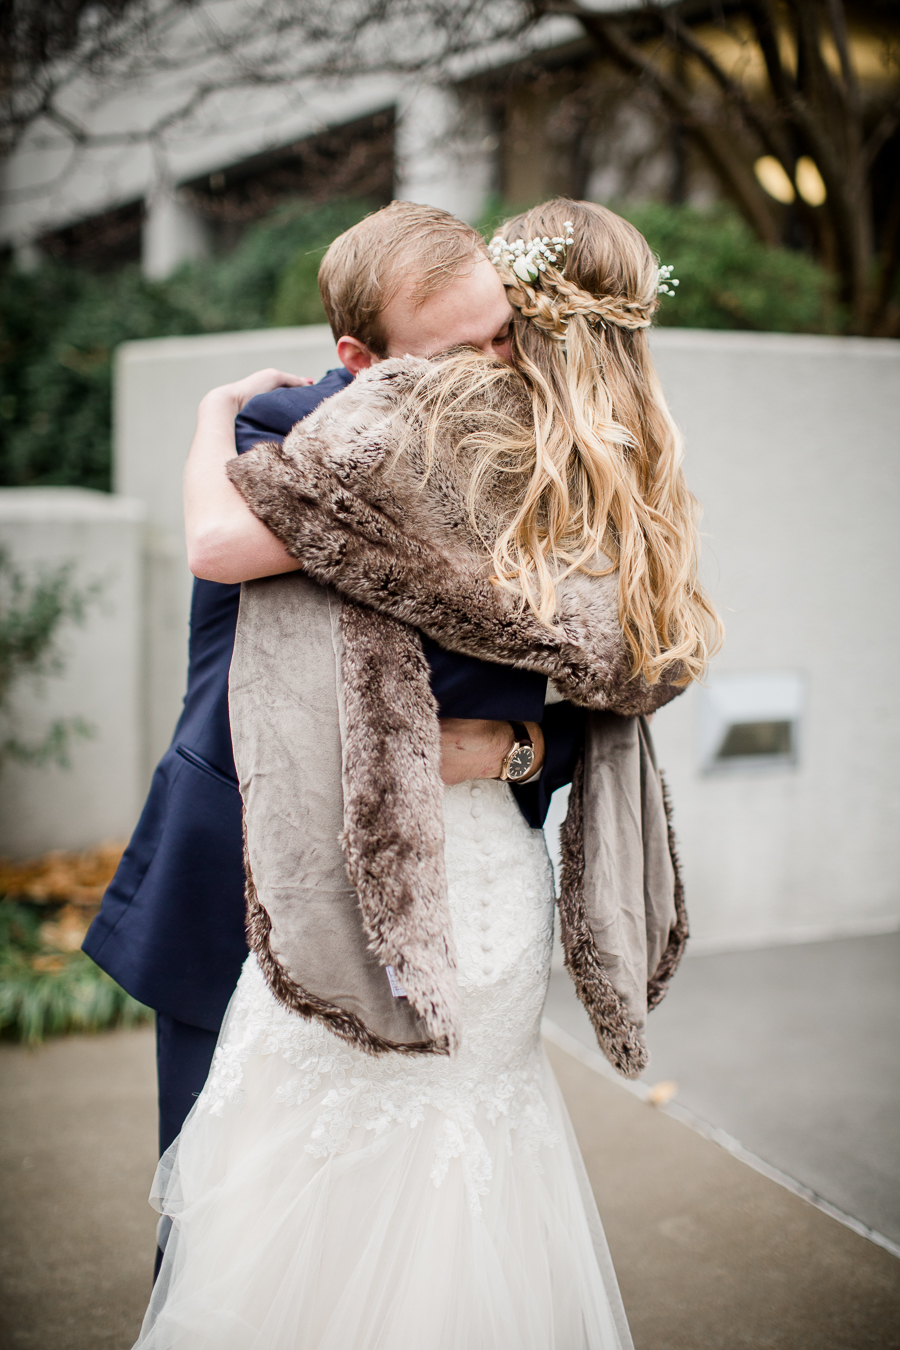 Big hug during the first look pictures at this winter wedding at Knoxville Wedding Venue, Jackson Terminal, by Knoxville Wedding Photographer, Amanda May Photos.